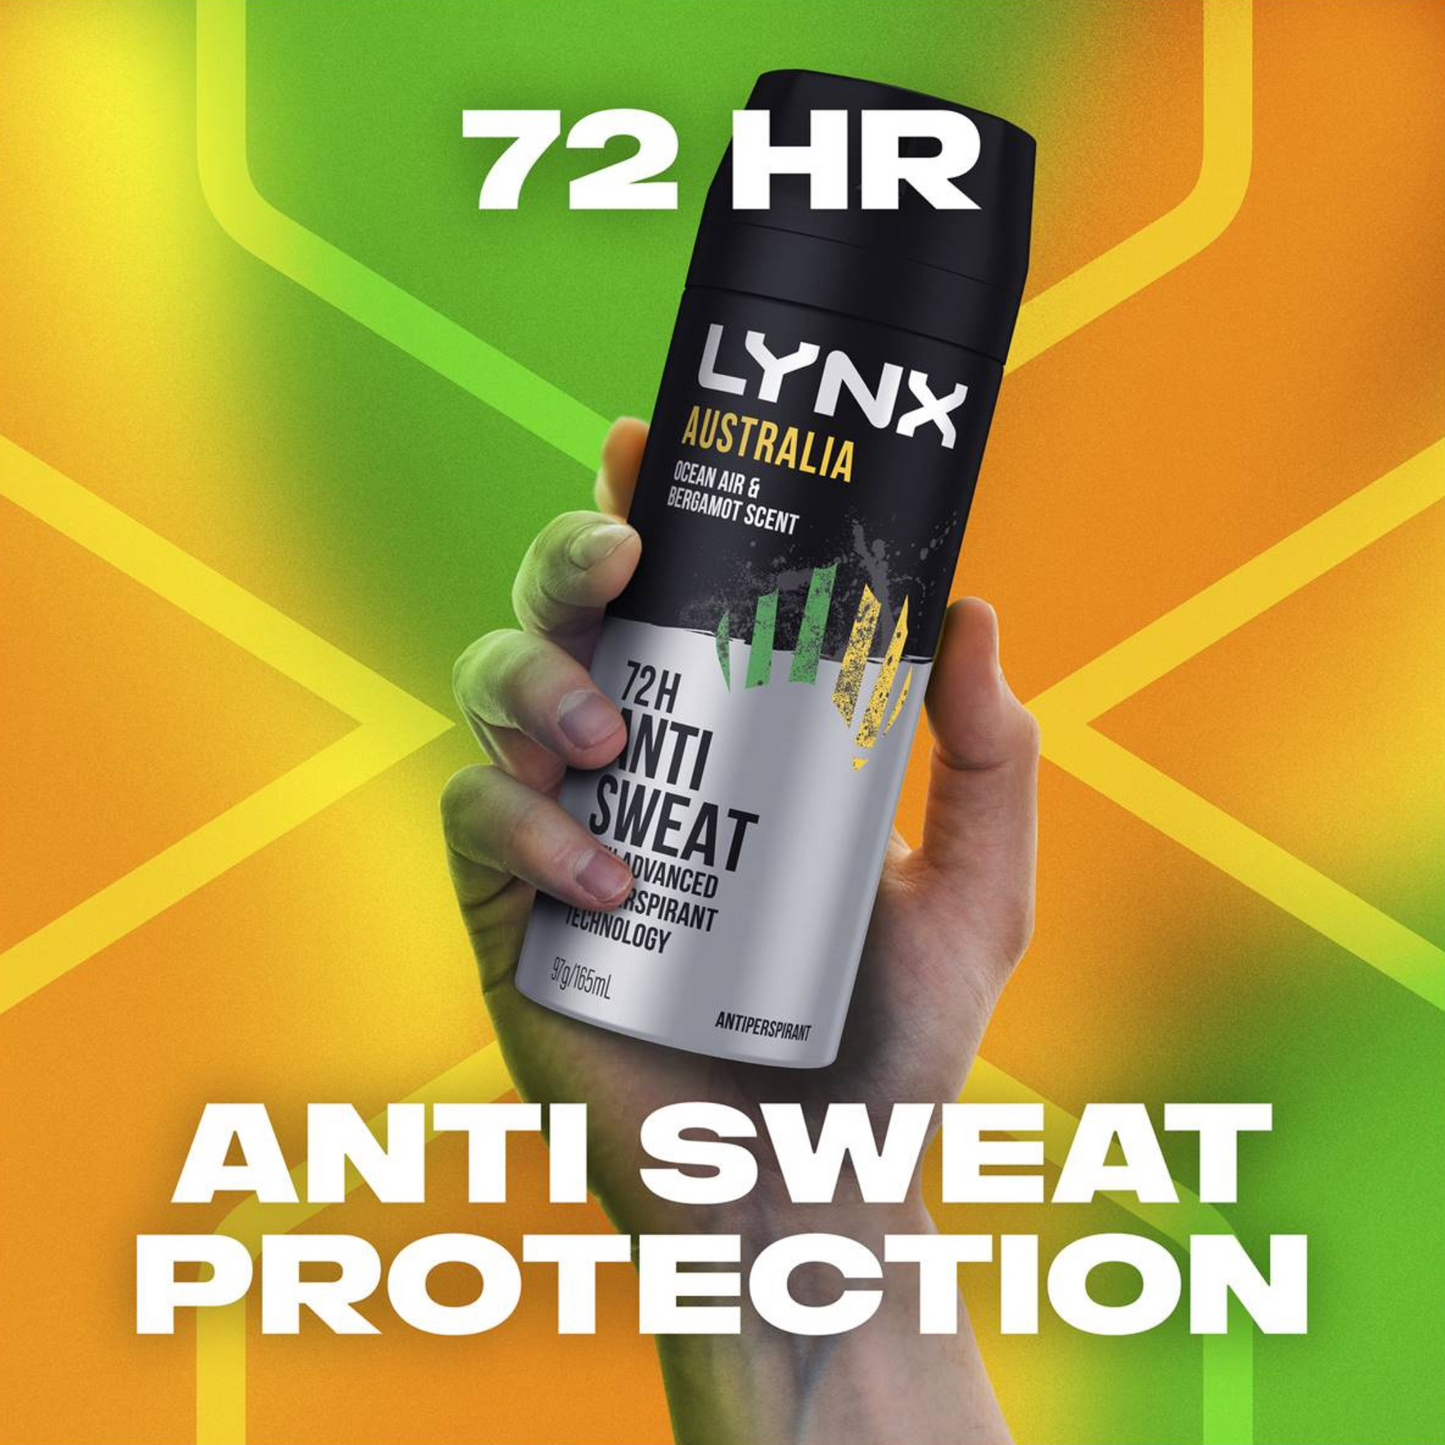 Lynx Australia Antiperspirant is a bold 72-hour deodorant with top notes of Bergamot & pineapple. Best imported foreign Australian Aussie anti-perspirant deo premium genuine authentic original real quality nice boyfriend bf scent perfume men gift idea ideas cheap price in Dhaka Chittagong Sylhet Comilla Bangladesh.